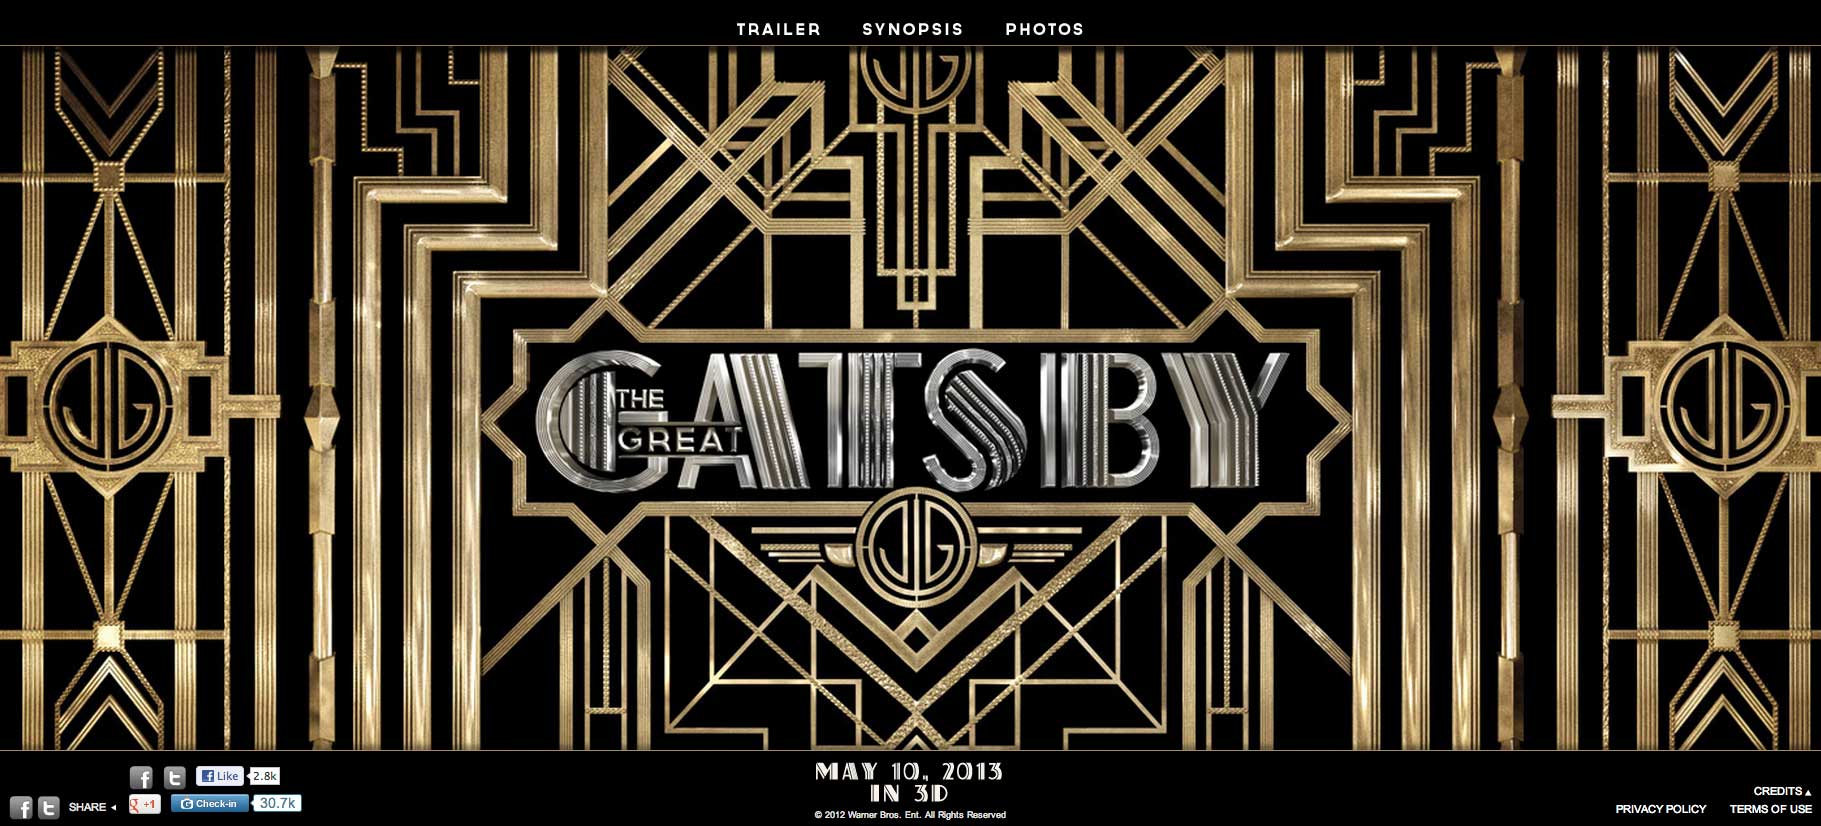 free The Great Gatsby